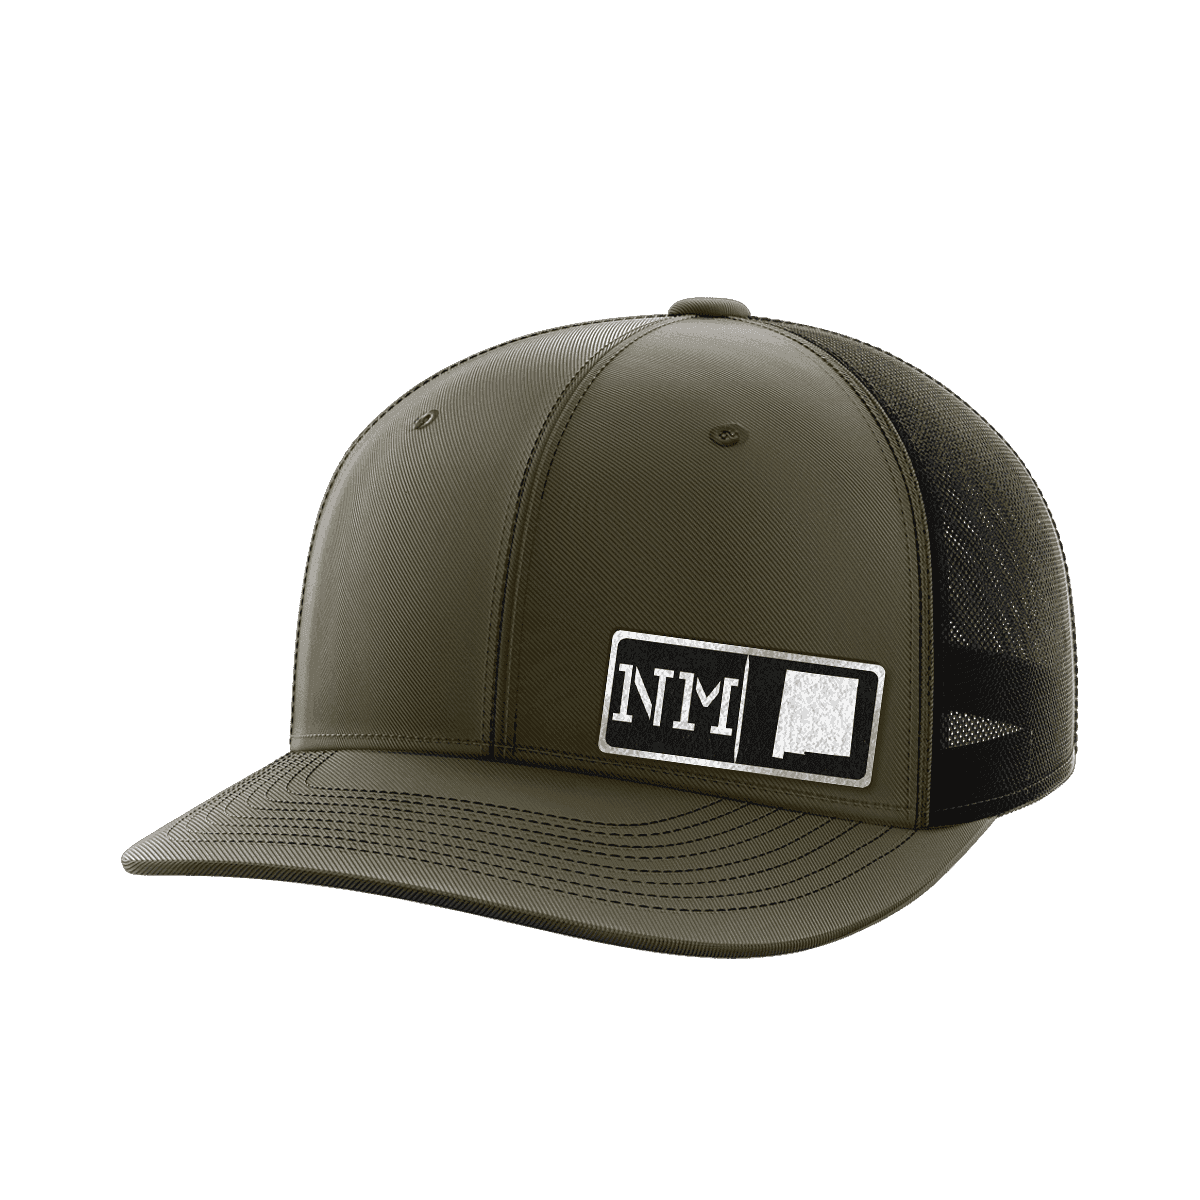 Thumbnail for New Mexico Homegrown Hats - Greater Half